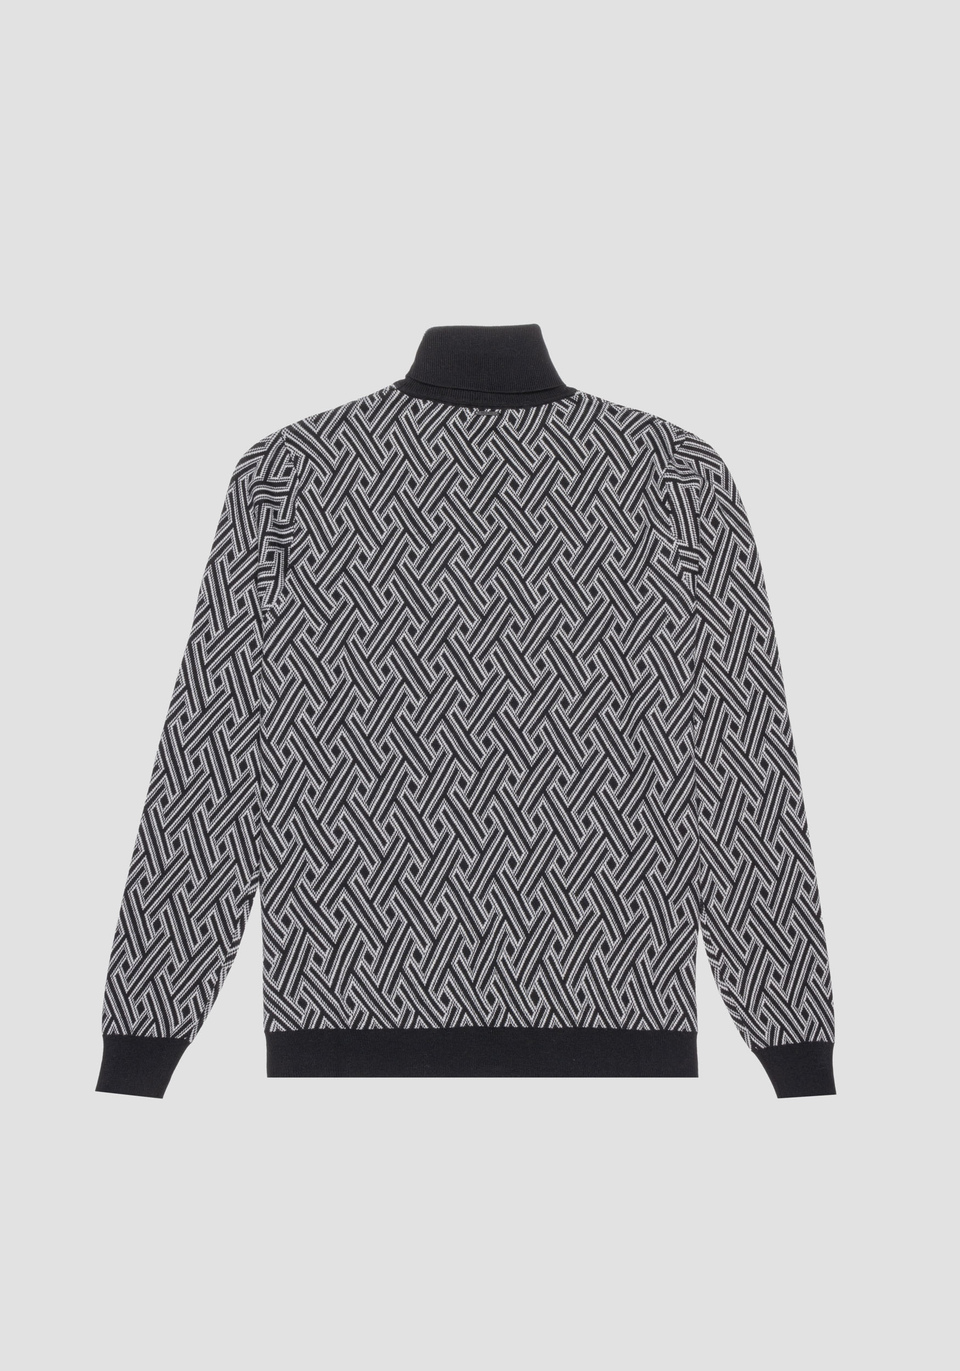 REGULAR FIT SWEATER IN PURE COTTON WITH GEOMETRIC PATTERN - Antony Morato Online Shop